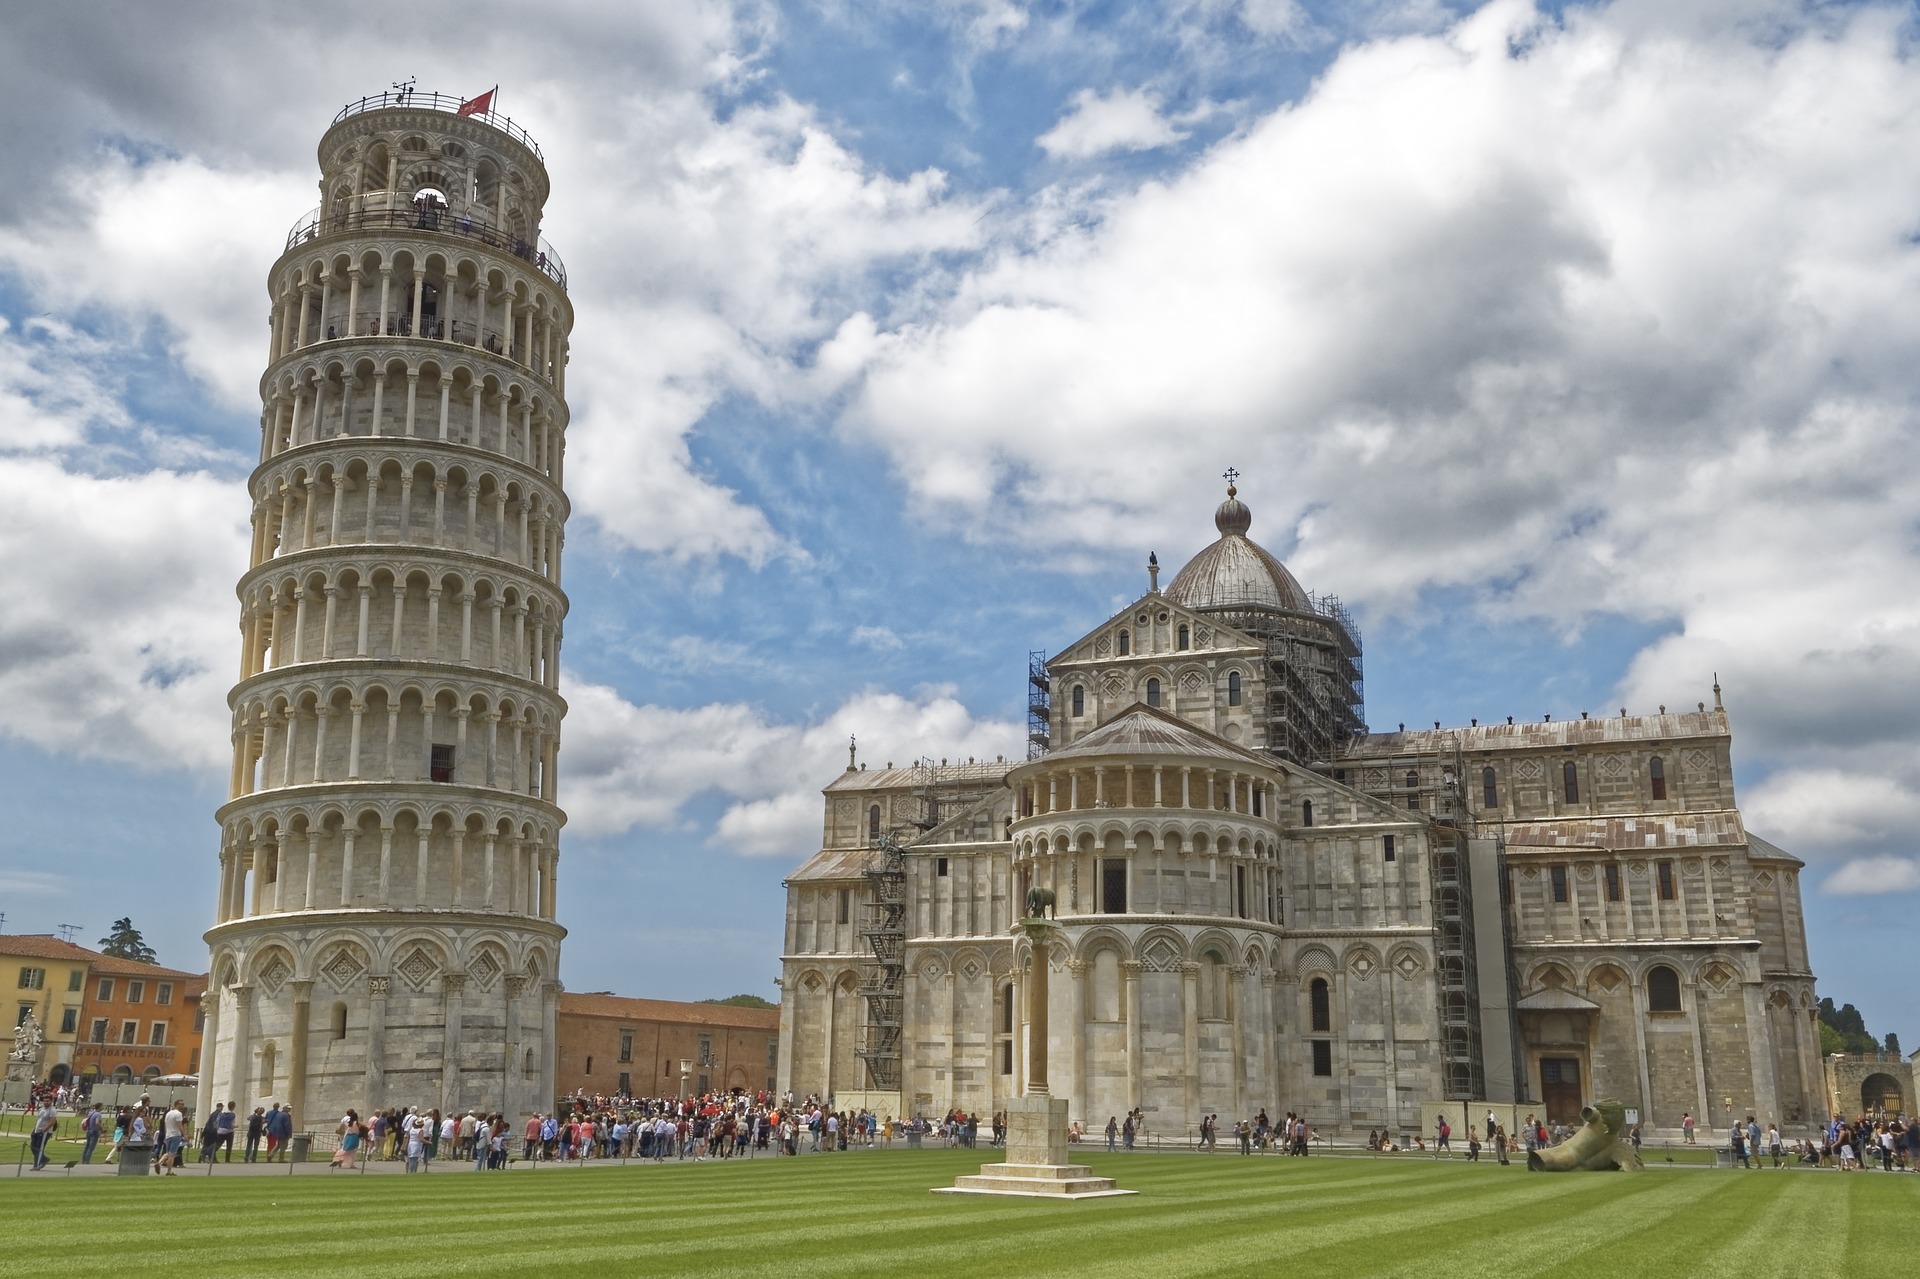 TODAY IN HISTORY:  Leaning Tower of Pisa closes (Jan. 7, 1990)